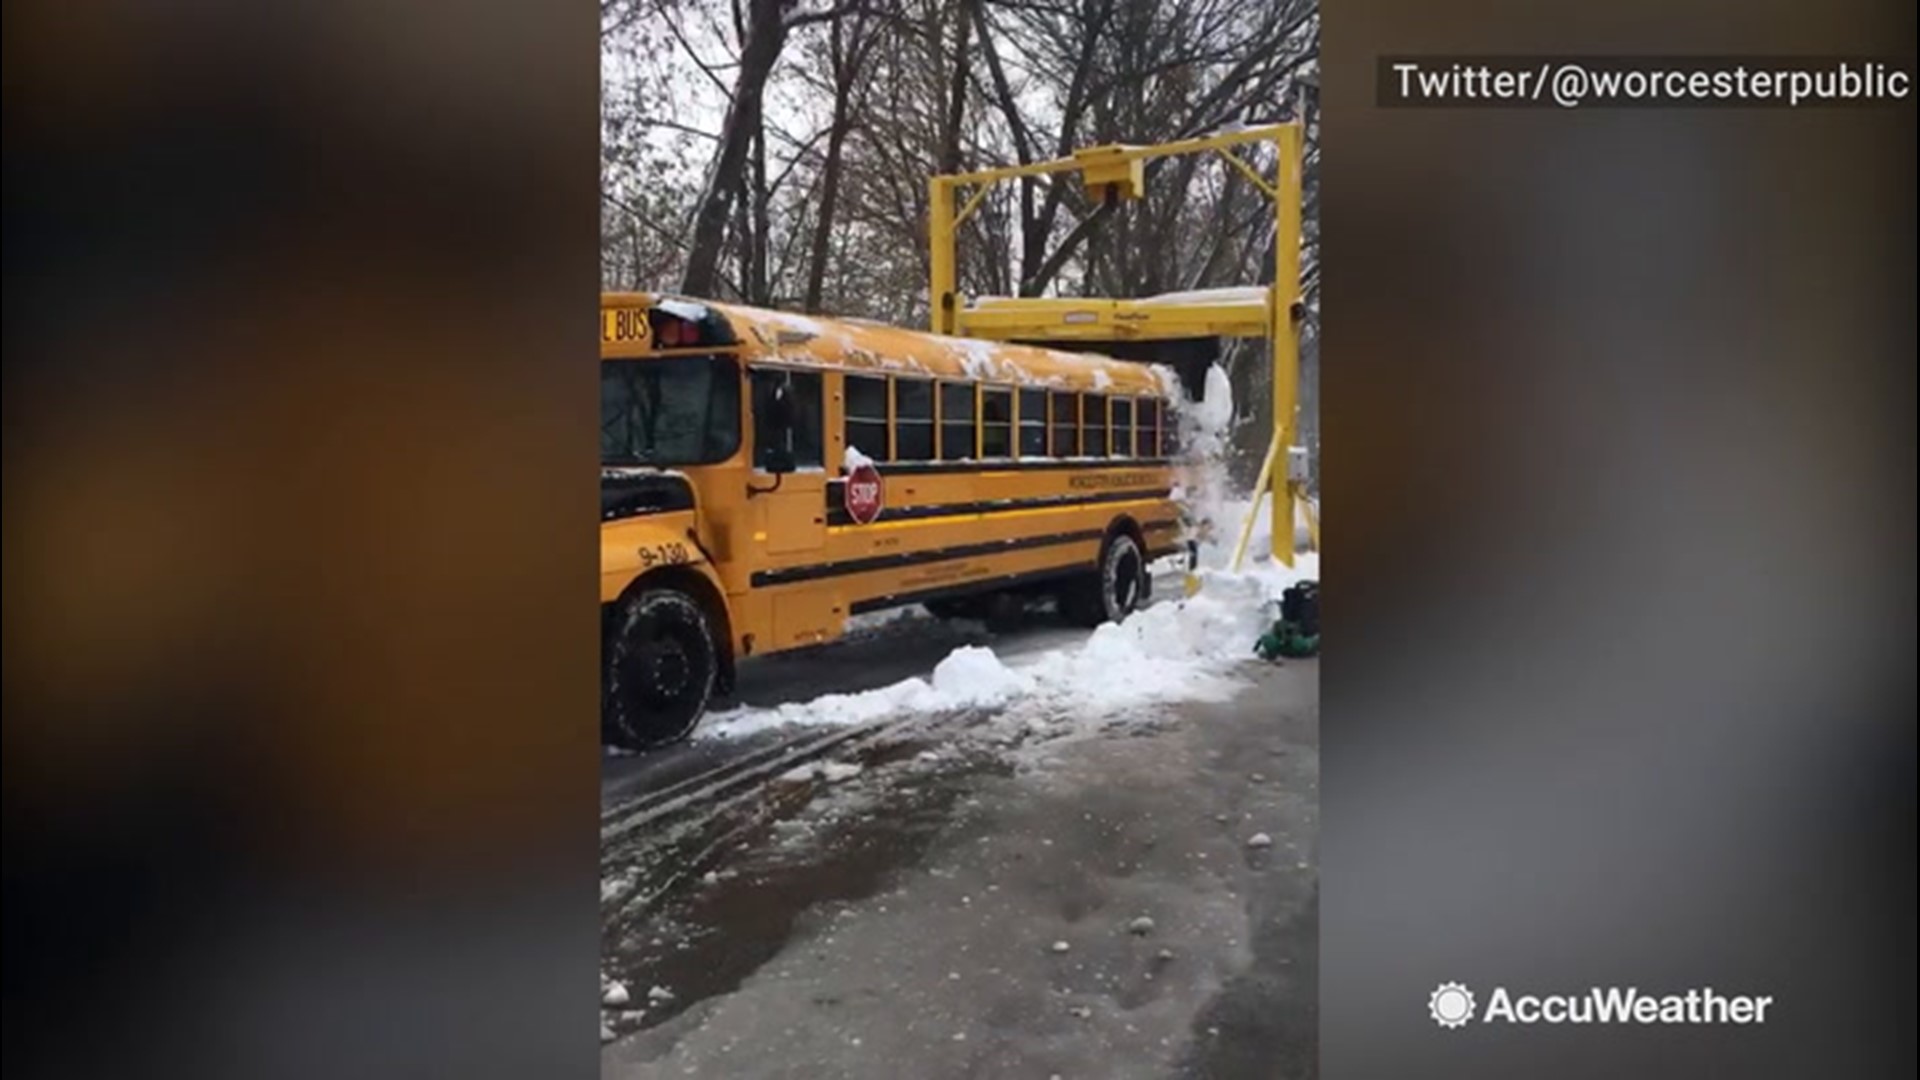 Heavy snow fell around the Worcester, Massachusetts, area this week, causing school to be canceled for several days.